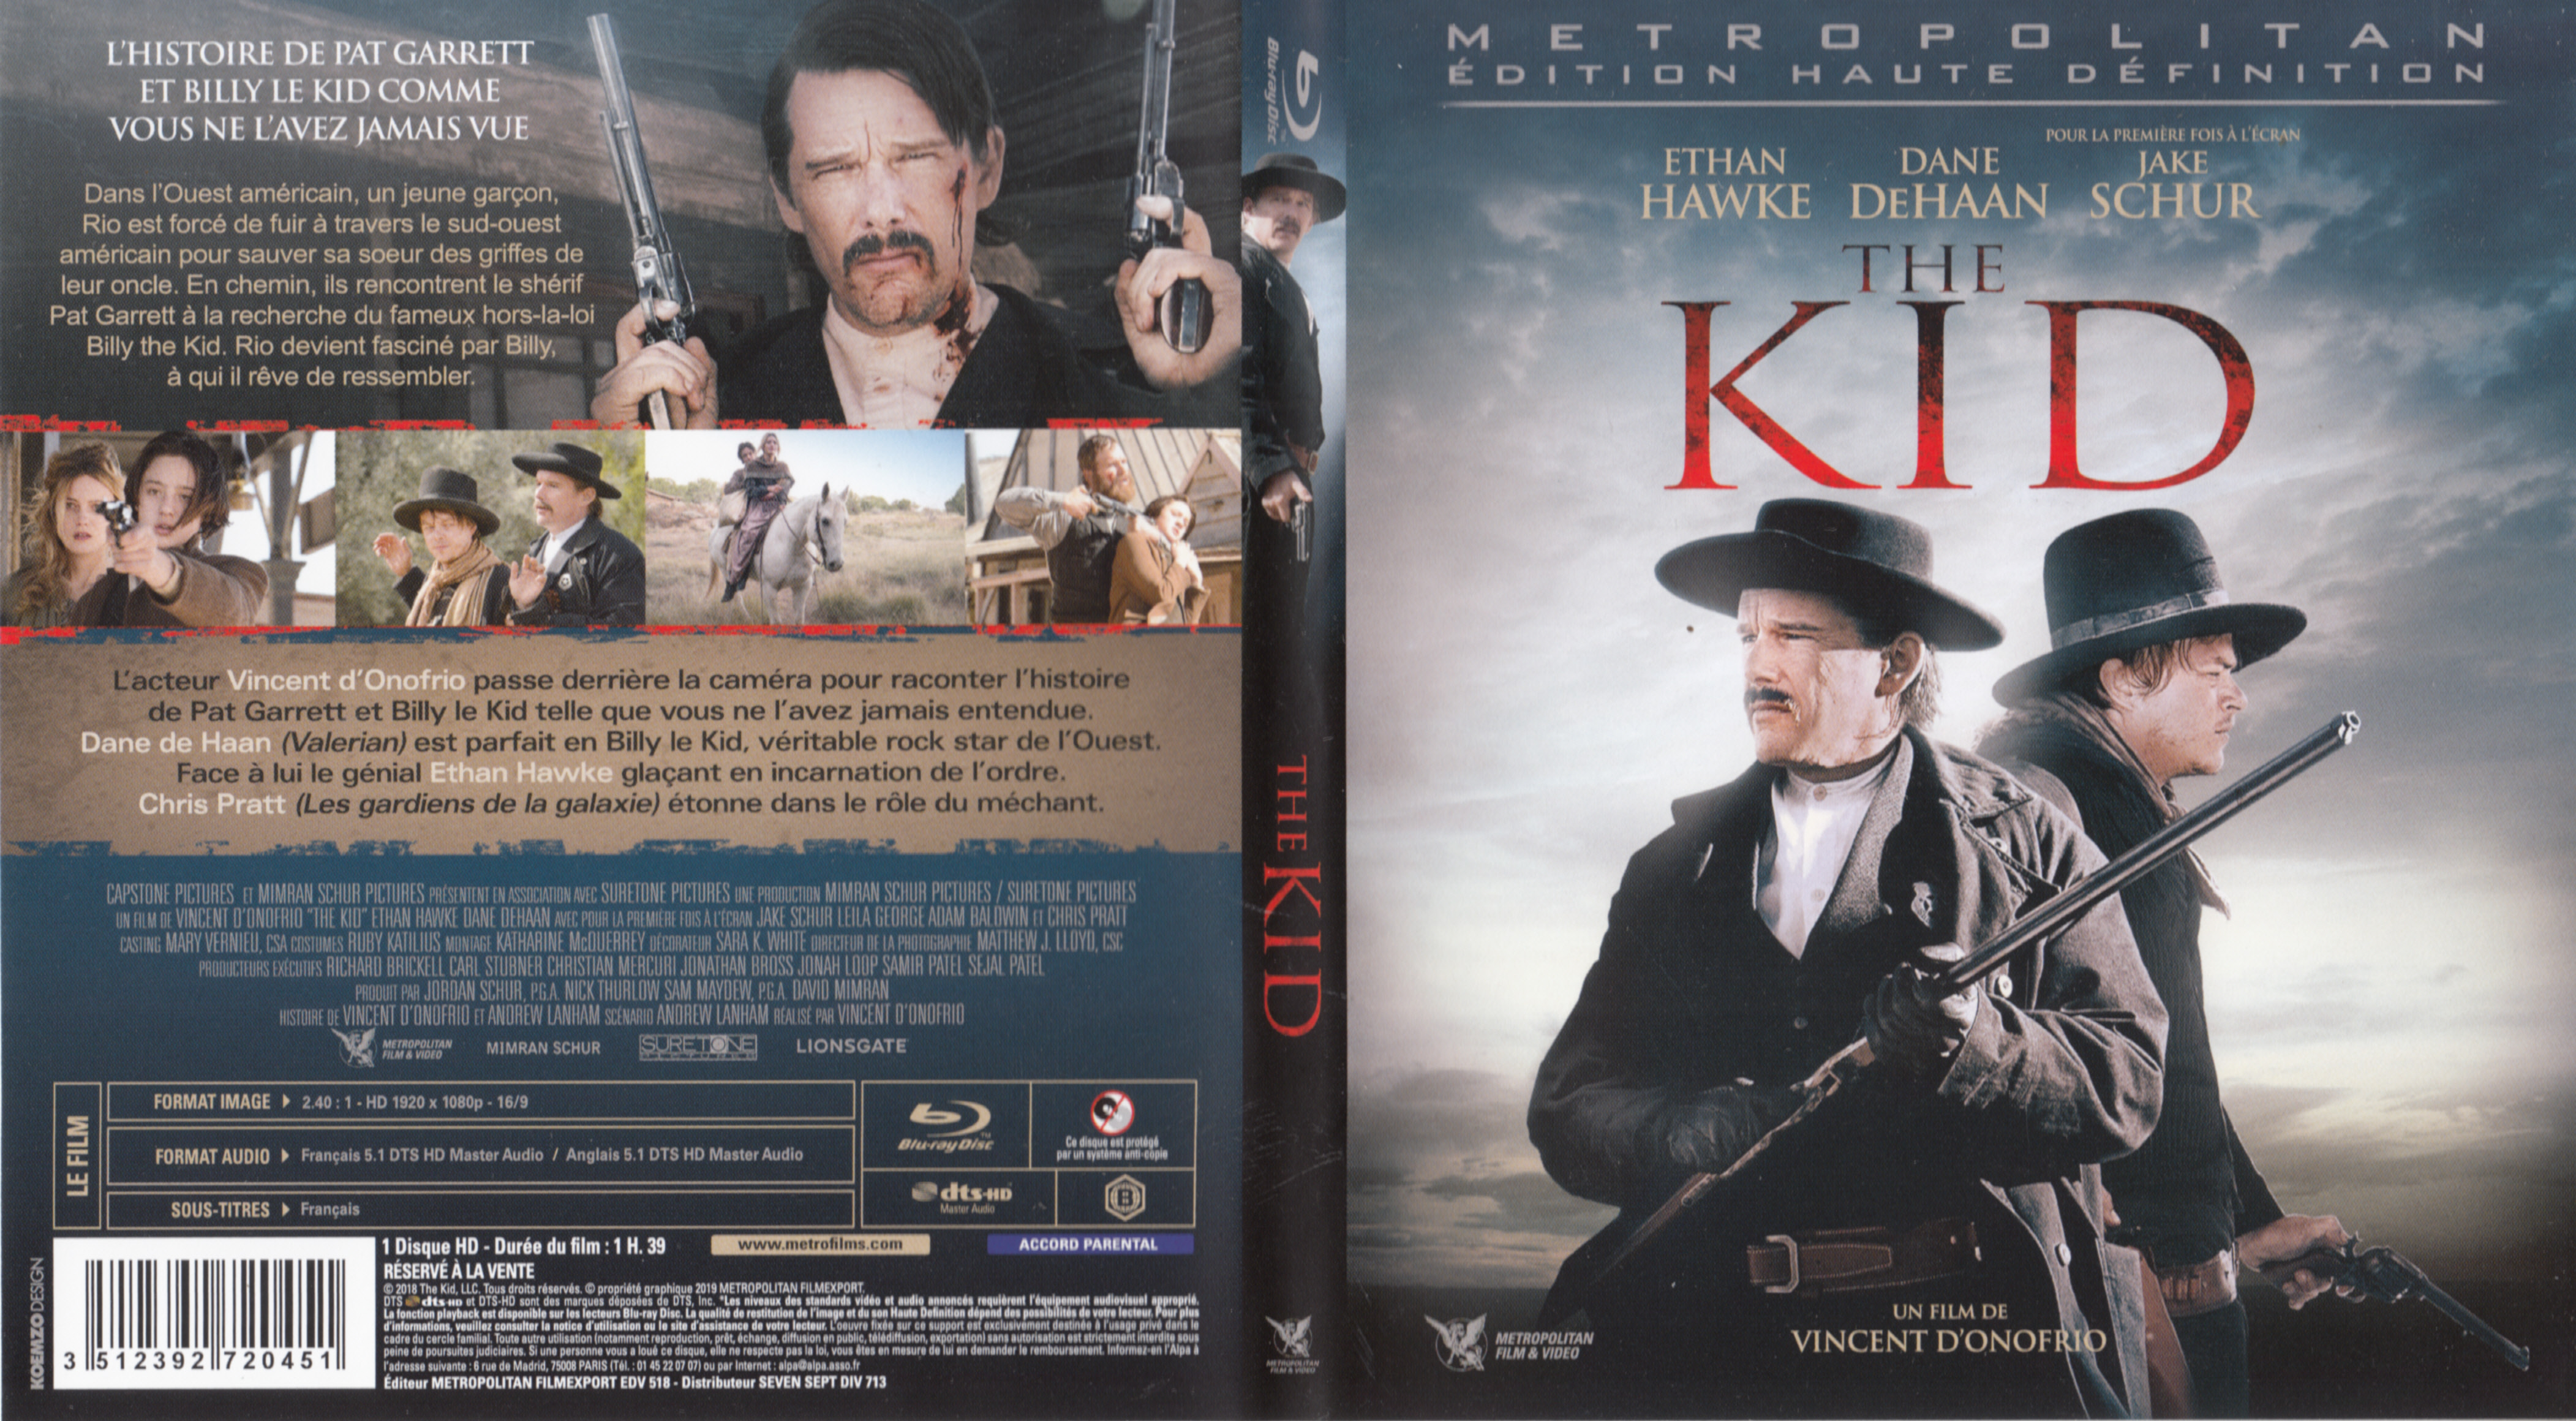 Jaquette DVD The kid (2018) (BLU-RAY)